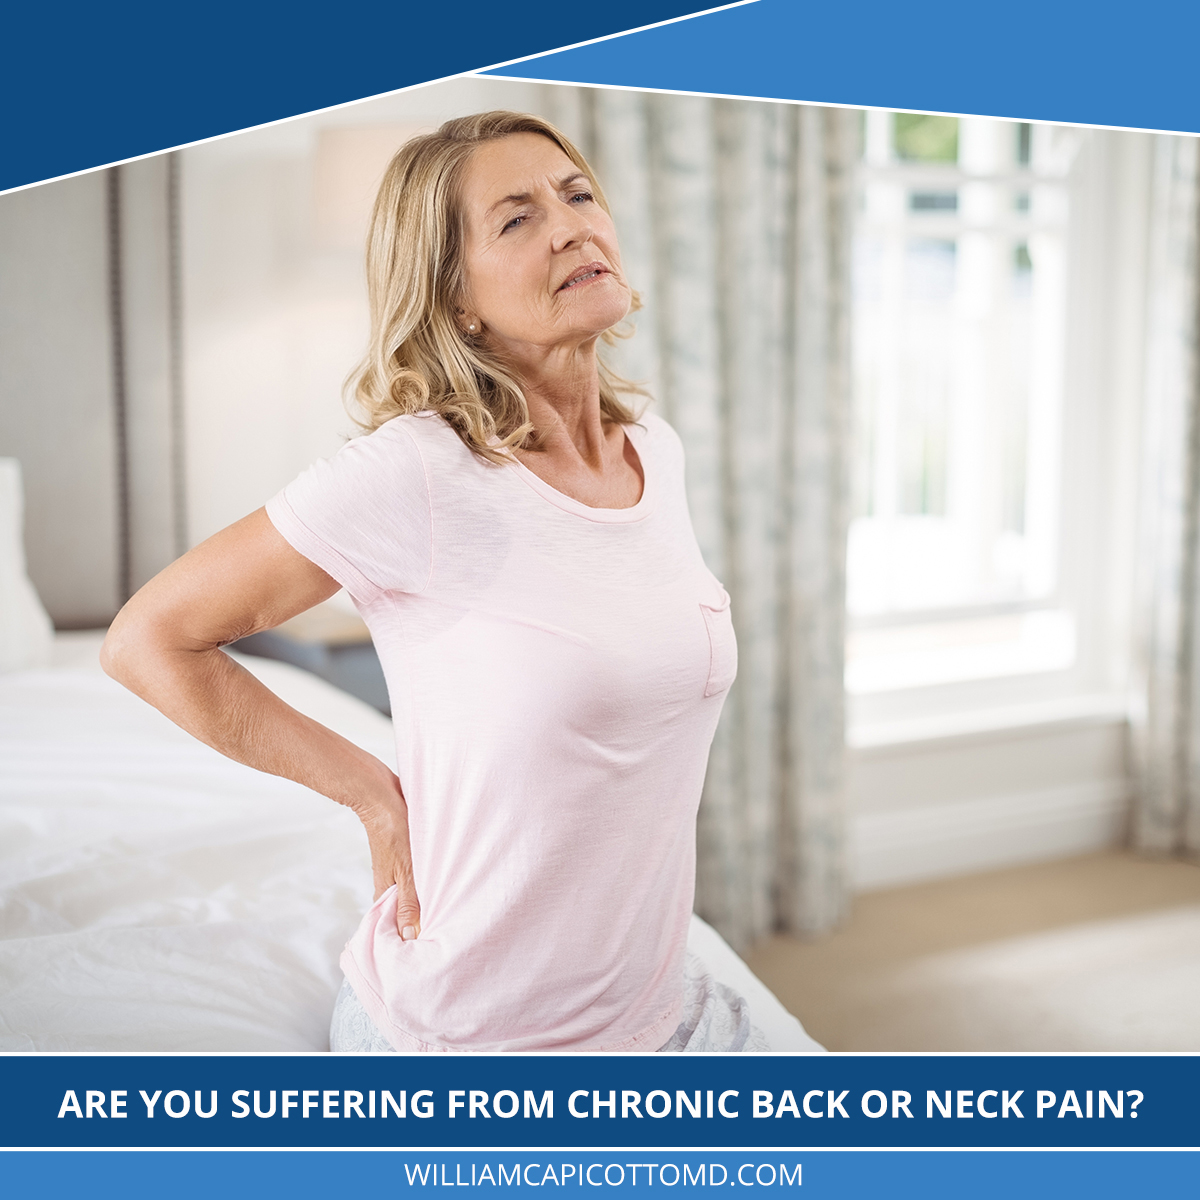 If you’re suffering from chronic back or neck pain...